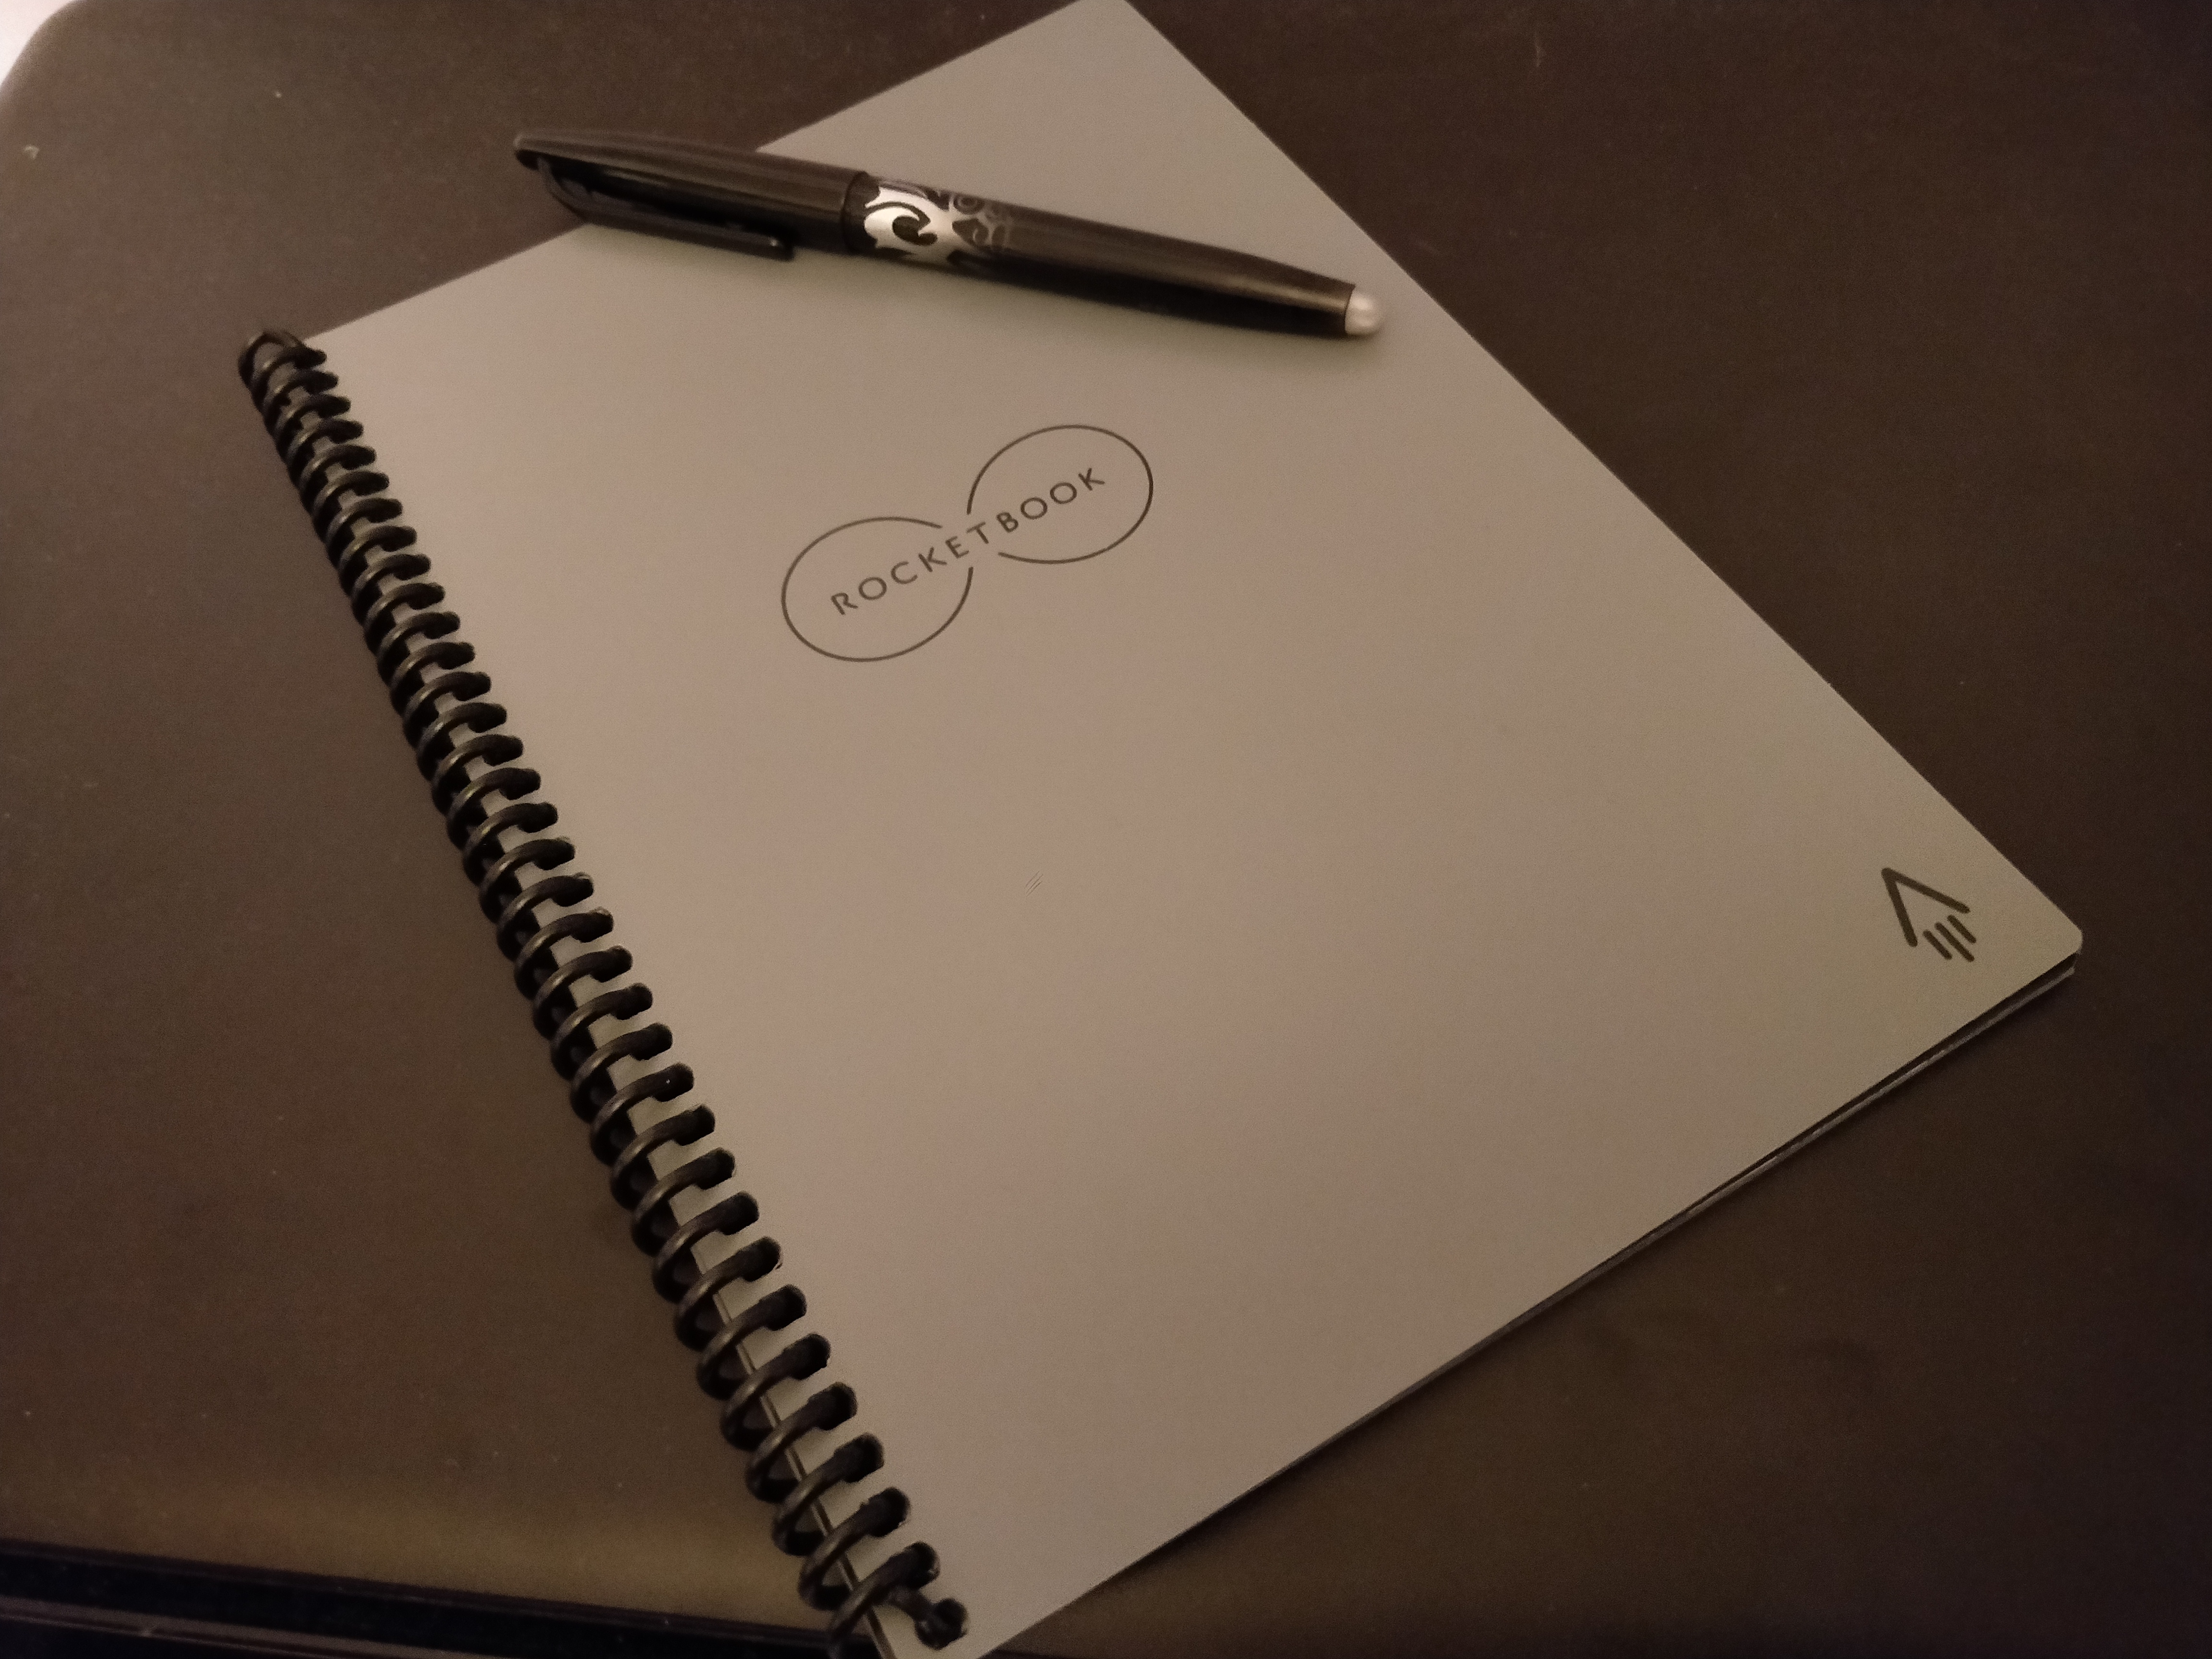 Rocketbook Core notepad and pen